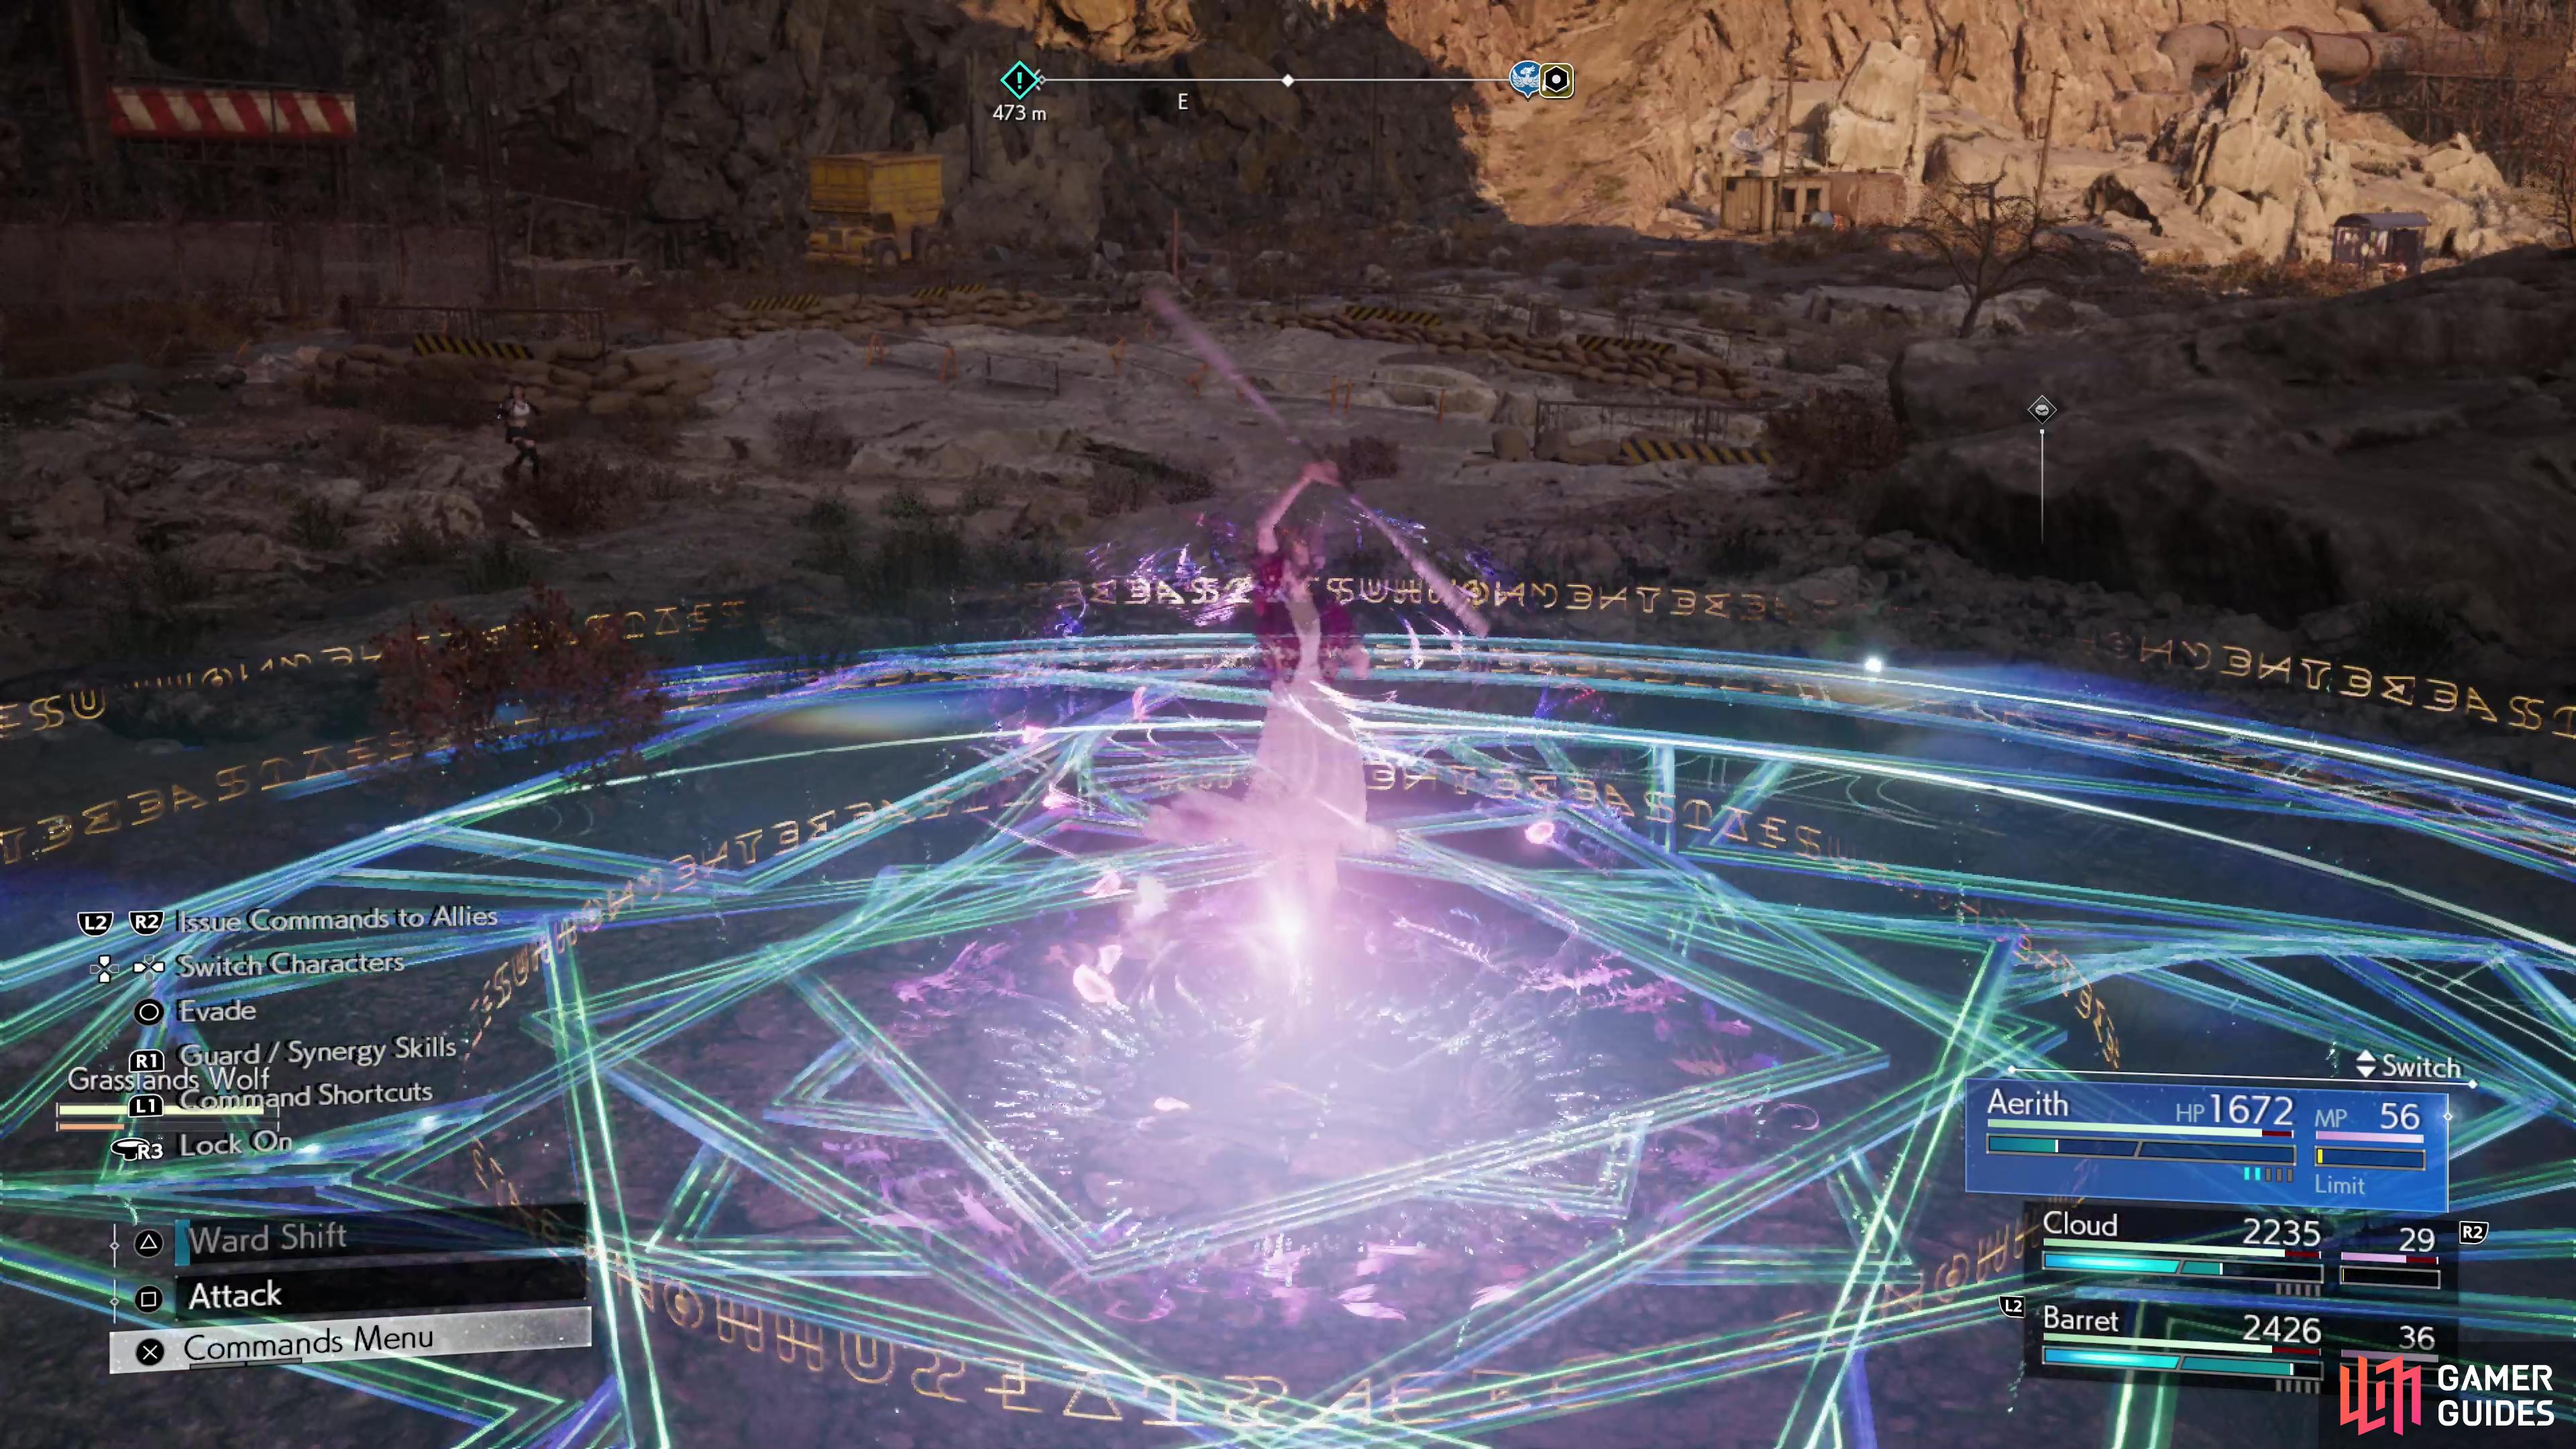 Aerith is somewhat slow, but you can shed aggro by warping between her wards.